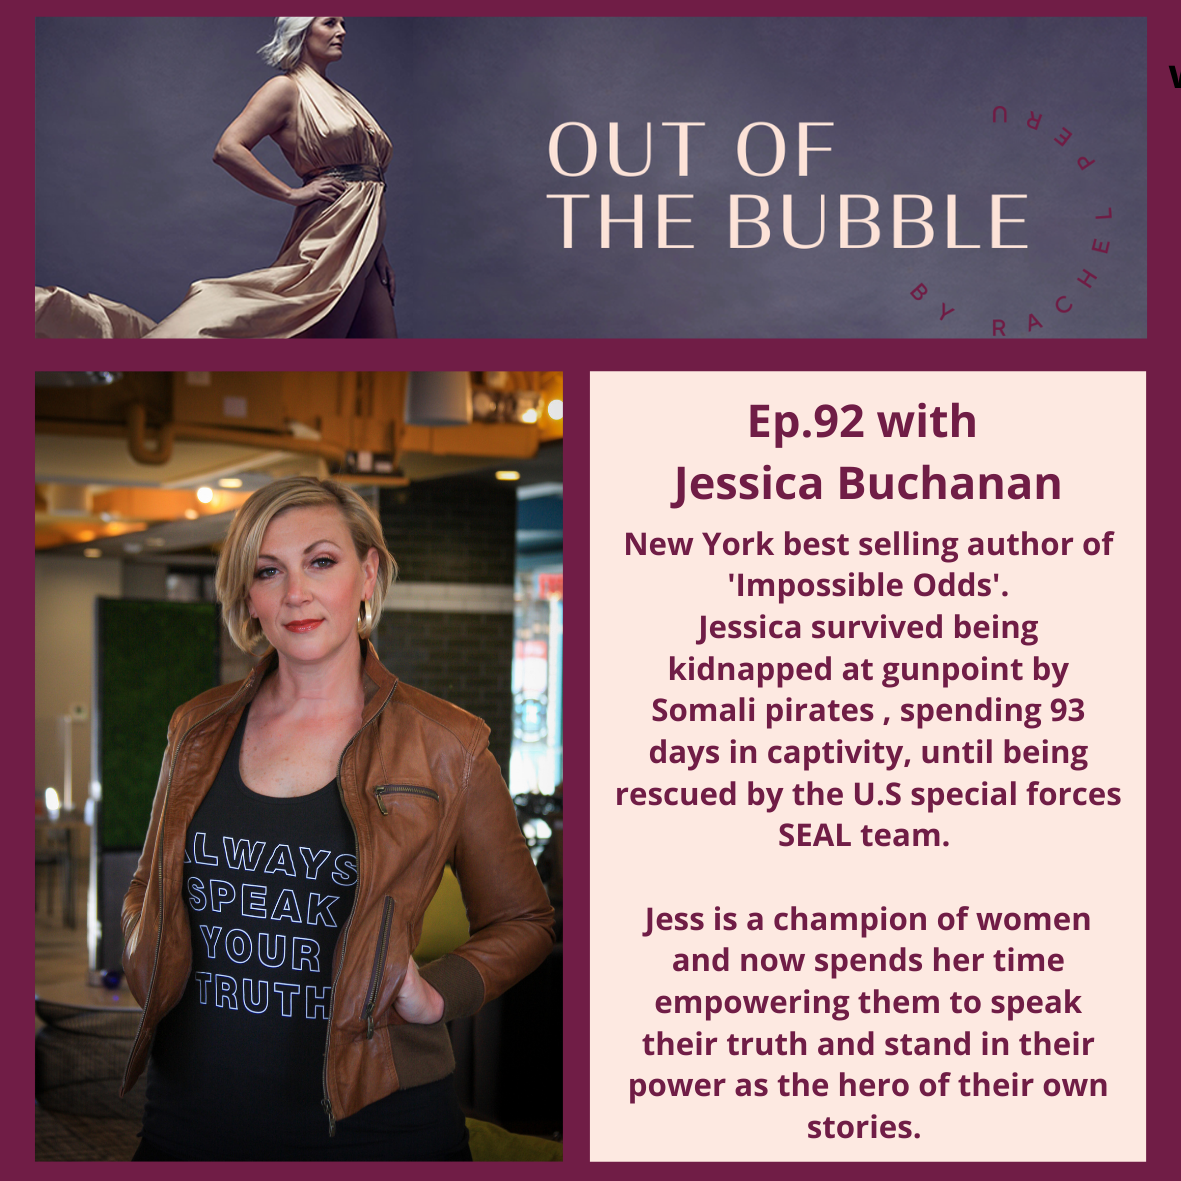 Ep.92 Liberte Free to Be with Jessica Buchanan, Finding your voice and speaking your truth.